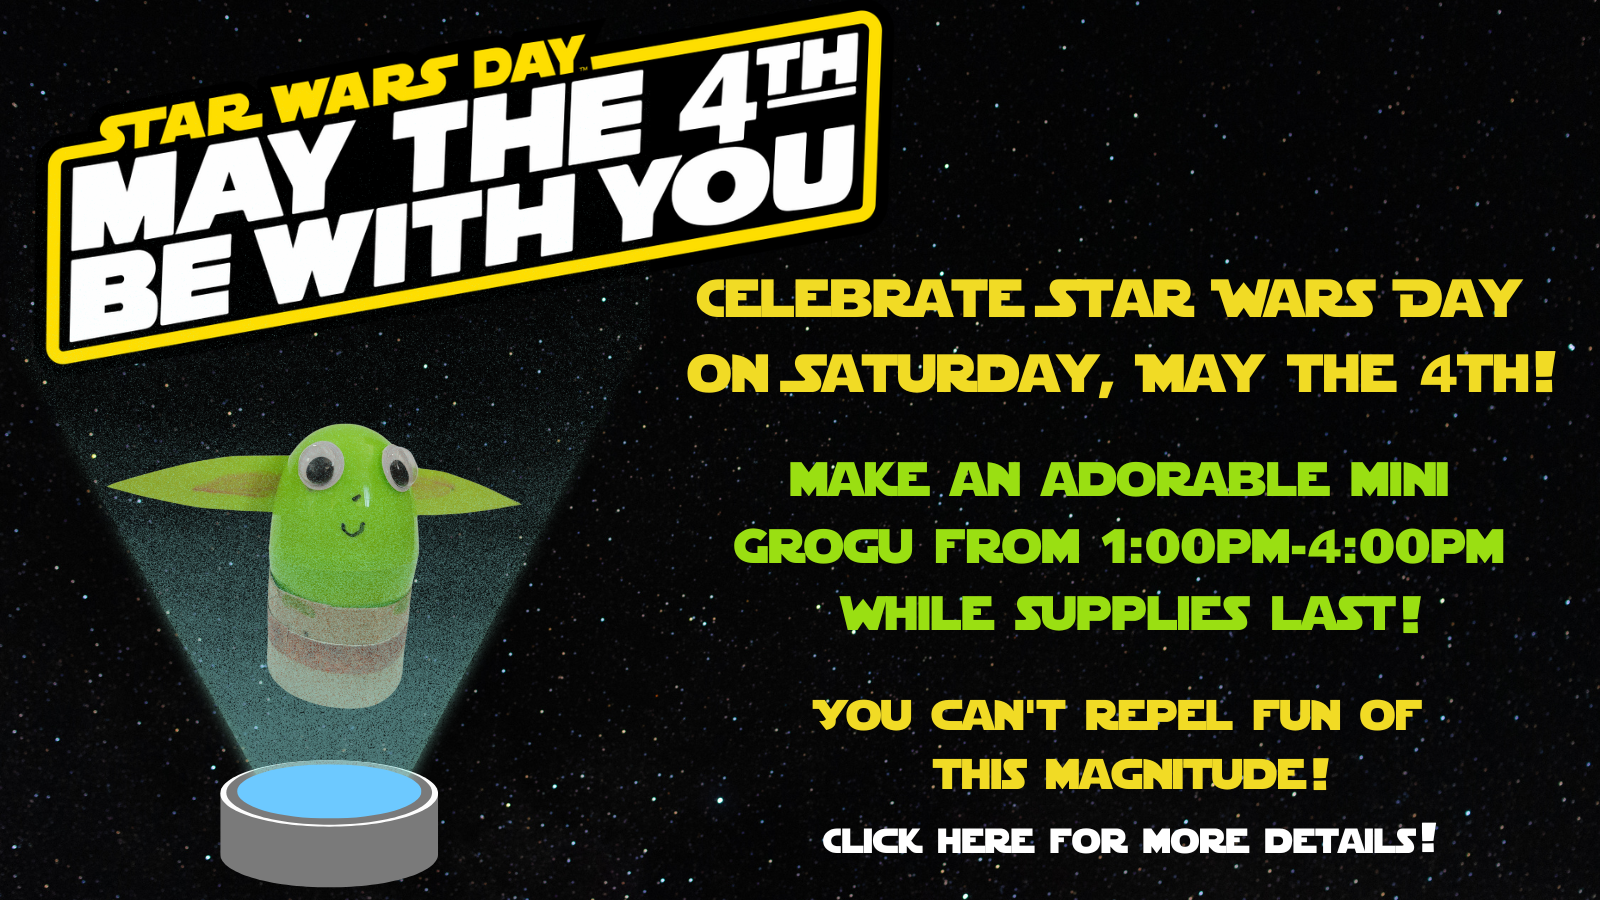 Hello there! *waves hand & uses Jedi Mind Trick* You want to come to the library & celebrate Star Wars Day.